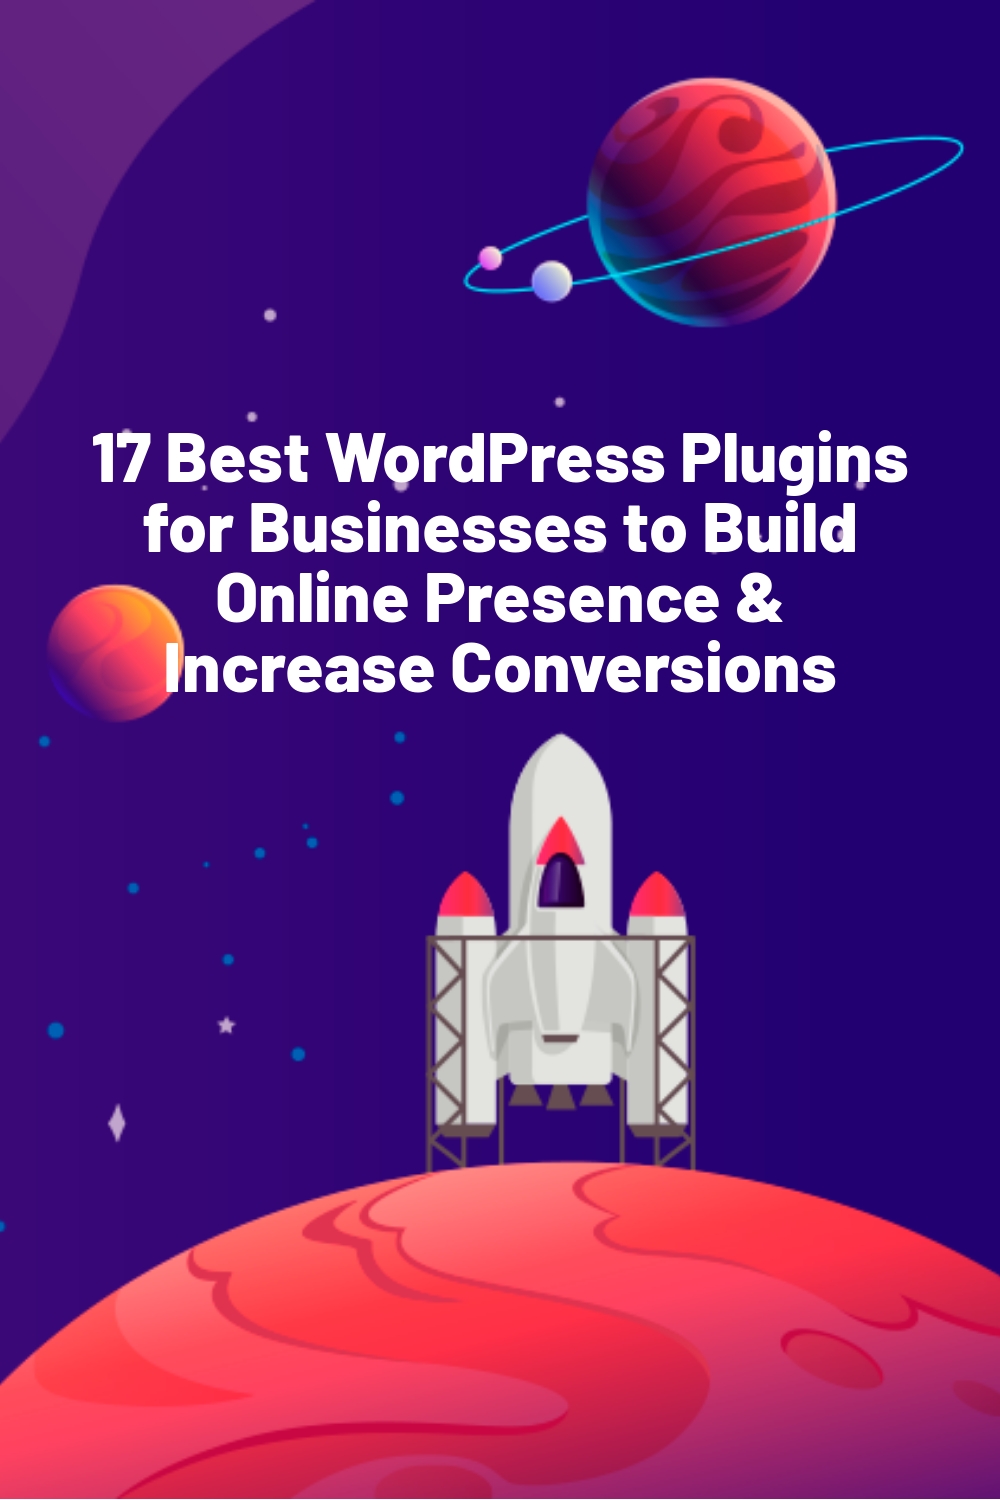 17 Best WordPress Plugins for Businesses to Build Online Presence & Increase Conversions